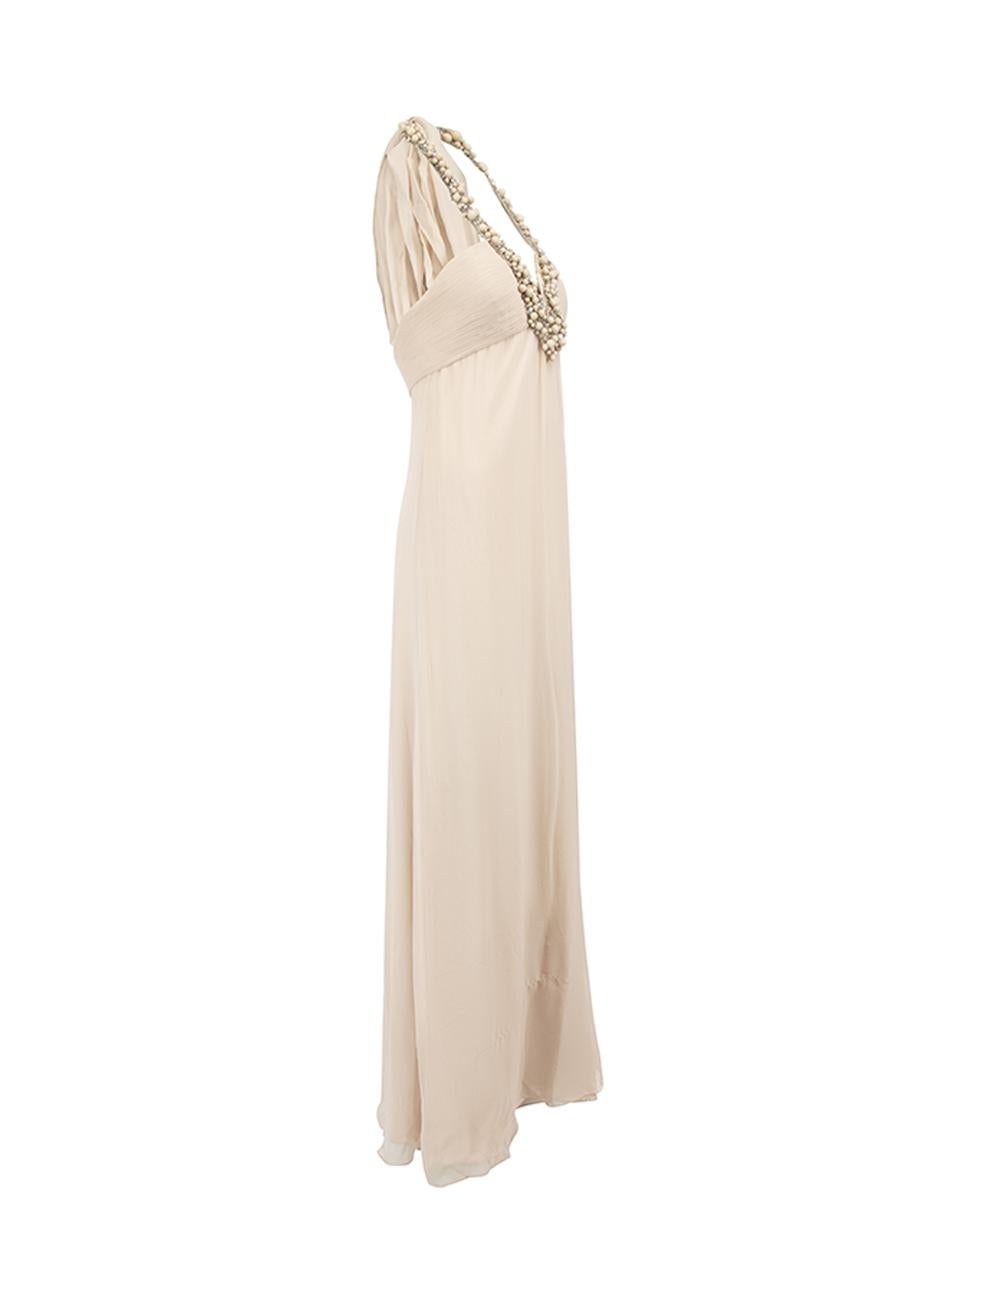 CONDITION is Very good. Minimal wear to dress is evident. Minimal wear and loose threads around the beaded neckline on this used Monique Lhuillier designer resale item.
 
 Details
 Beige
 Silk
 Gown
 Loose fit
 Sleeveless
 Halterneck
 Beaded